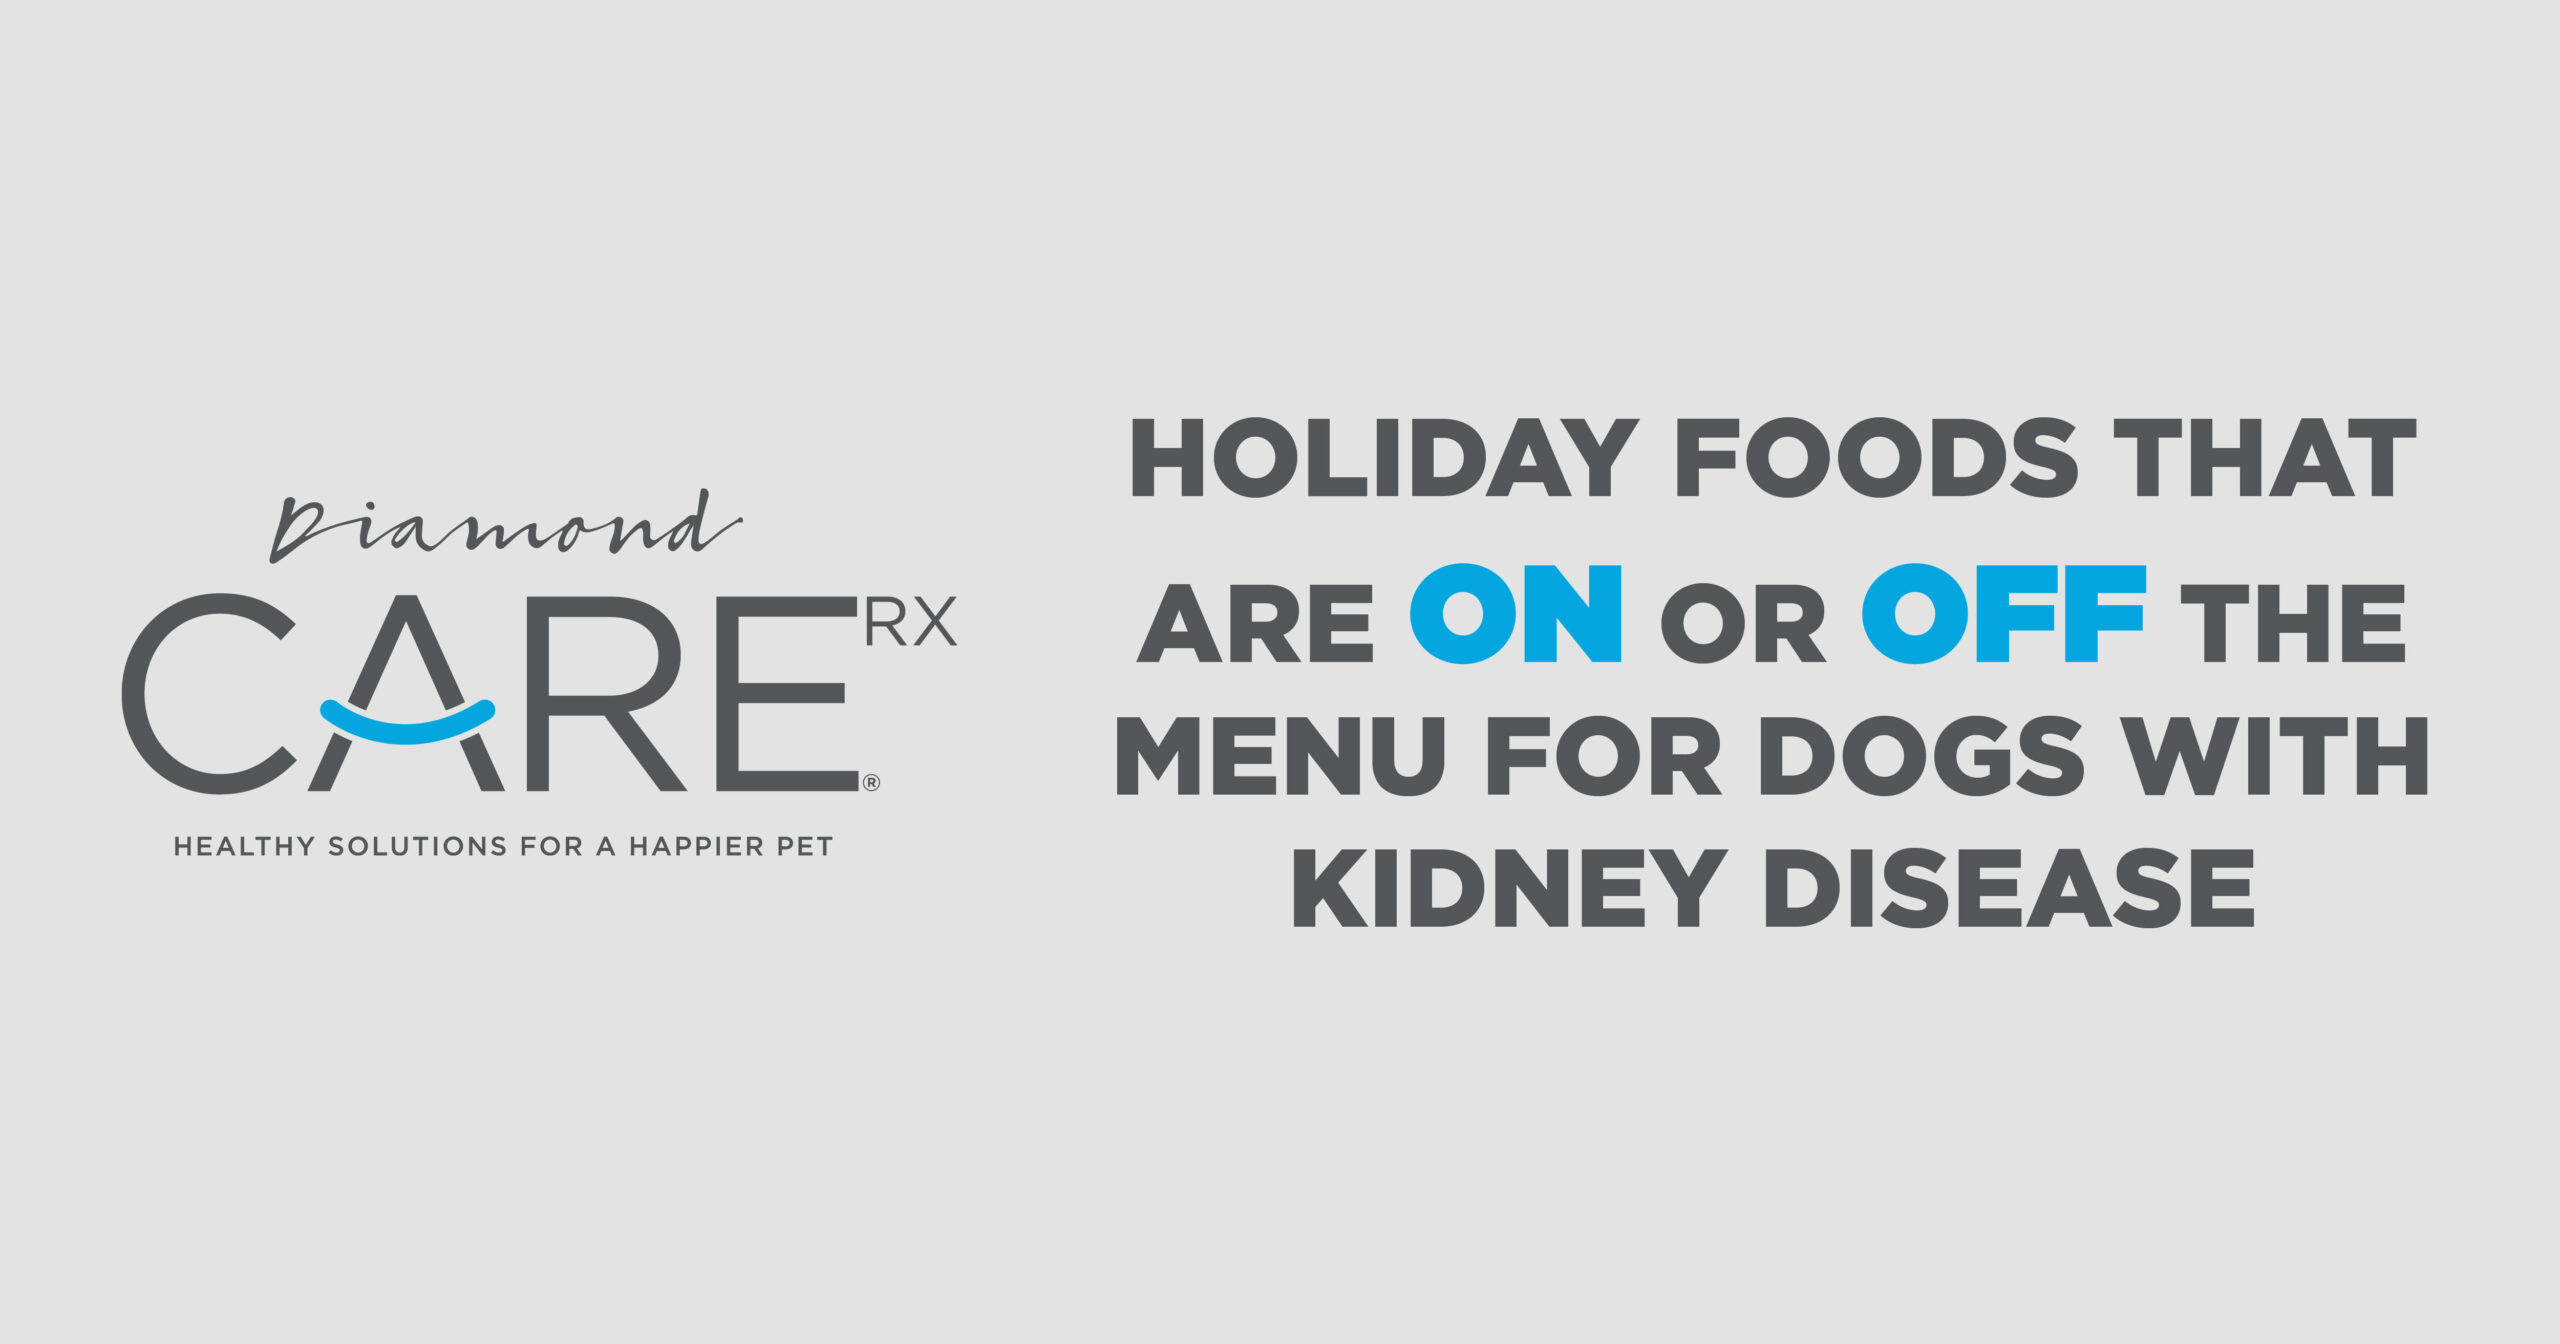 Text Graphic About Holiday Foods for Dogs with Kidney Disease | Diamond CARE